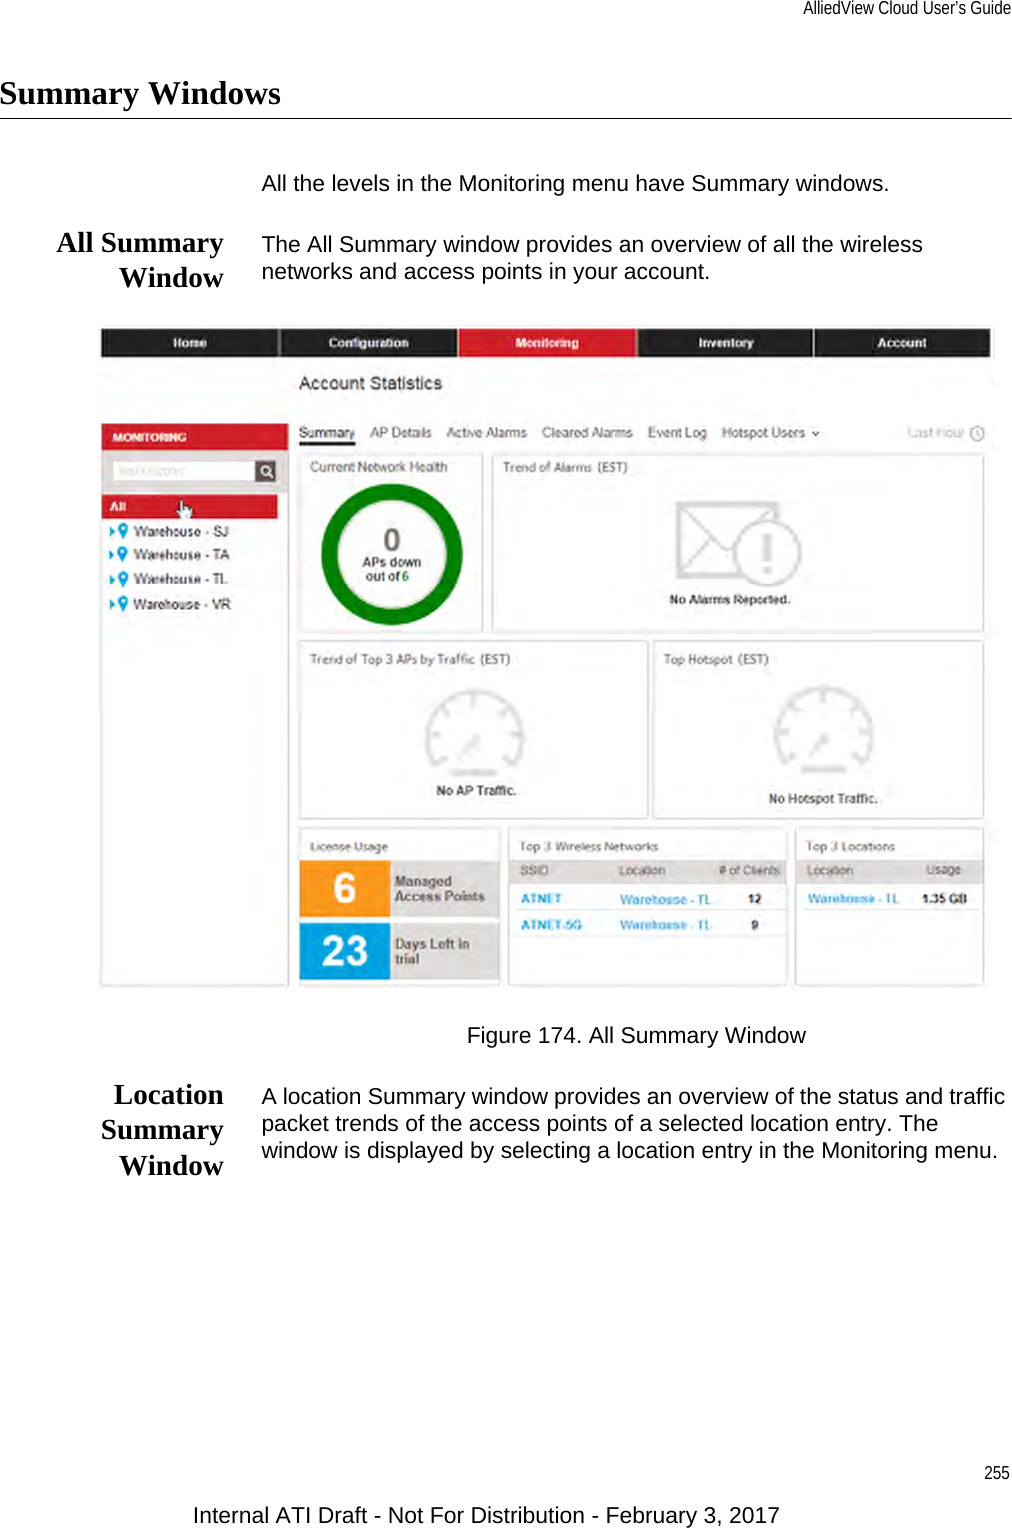 AlliedView Cloud User’s Guide255Summary WindowsAll the levels in the Monitoring menu have Summary windows.All SummaryWindow The All Summary window provides an overview of all the wireless networks and access points in your account.Figure 174. All Summary WindowLocationSummaryWindowA location Summary window provides an overview of the status and traffic packet trends of the access points of a selected location entry. The window is displayed by selecting a location entry in the Monitoring menu.Internal ATI Draft - Not For Distribution - February 3, 2017